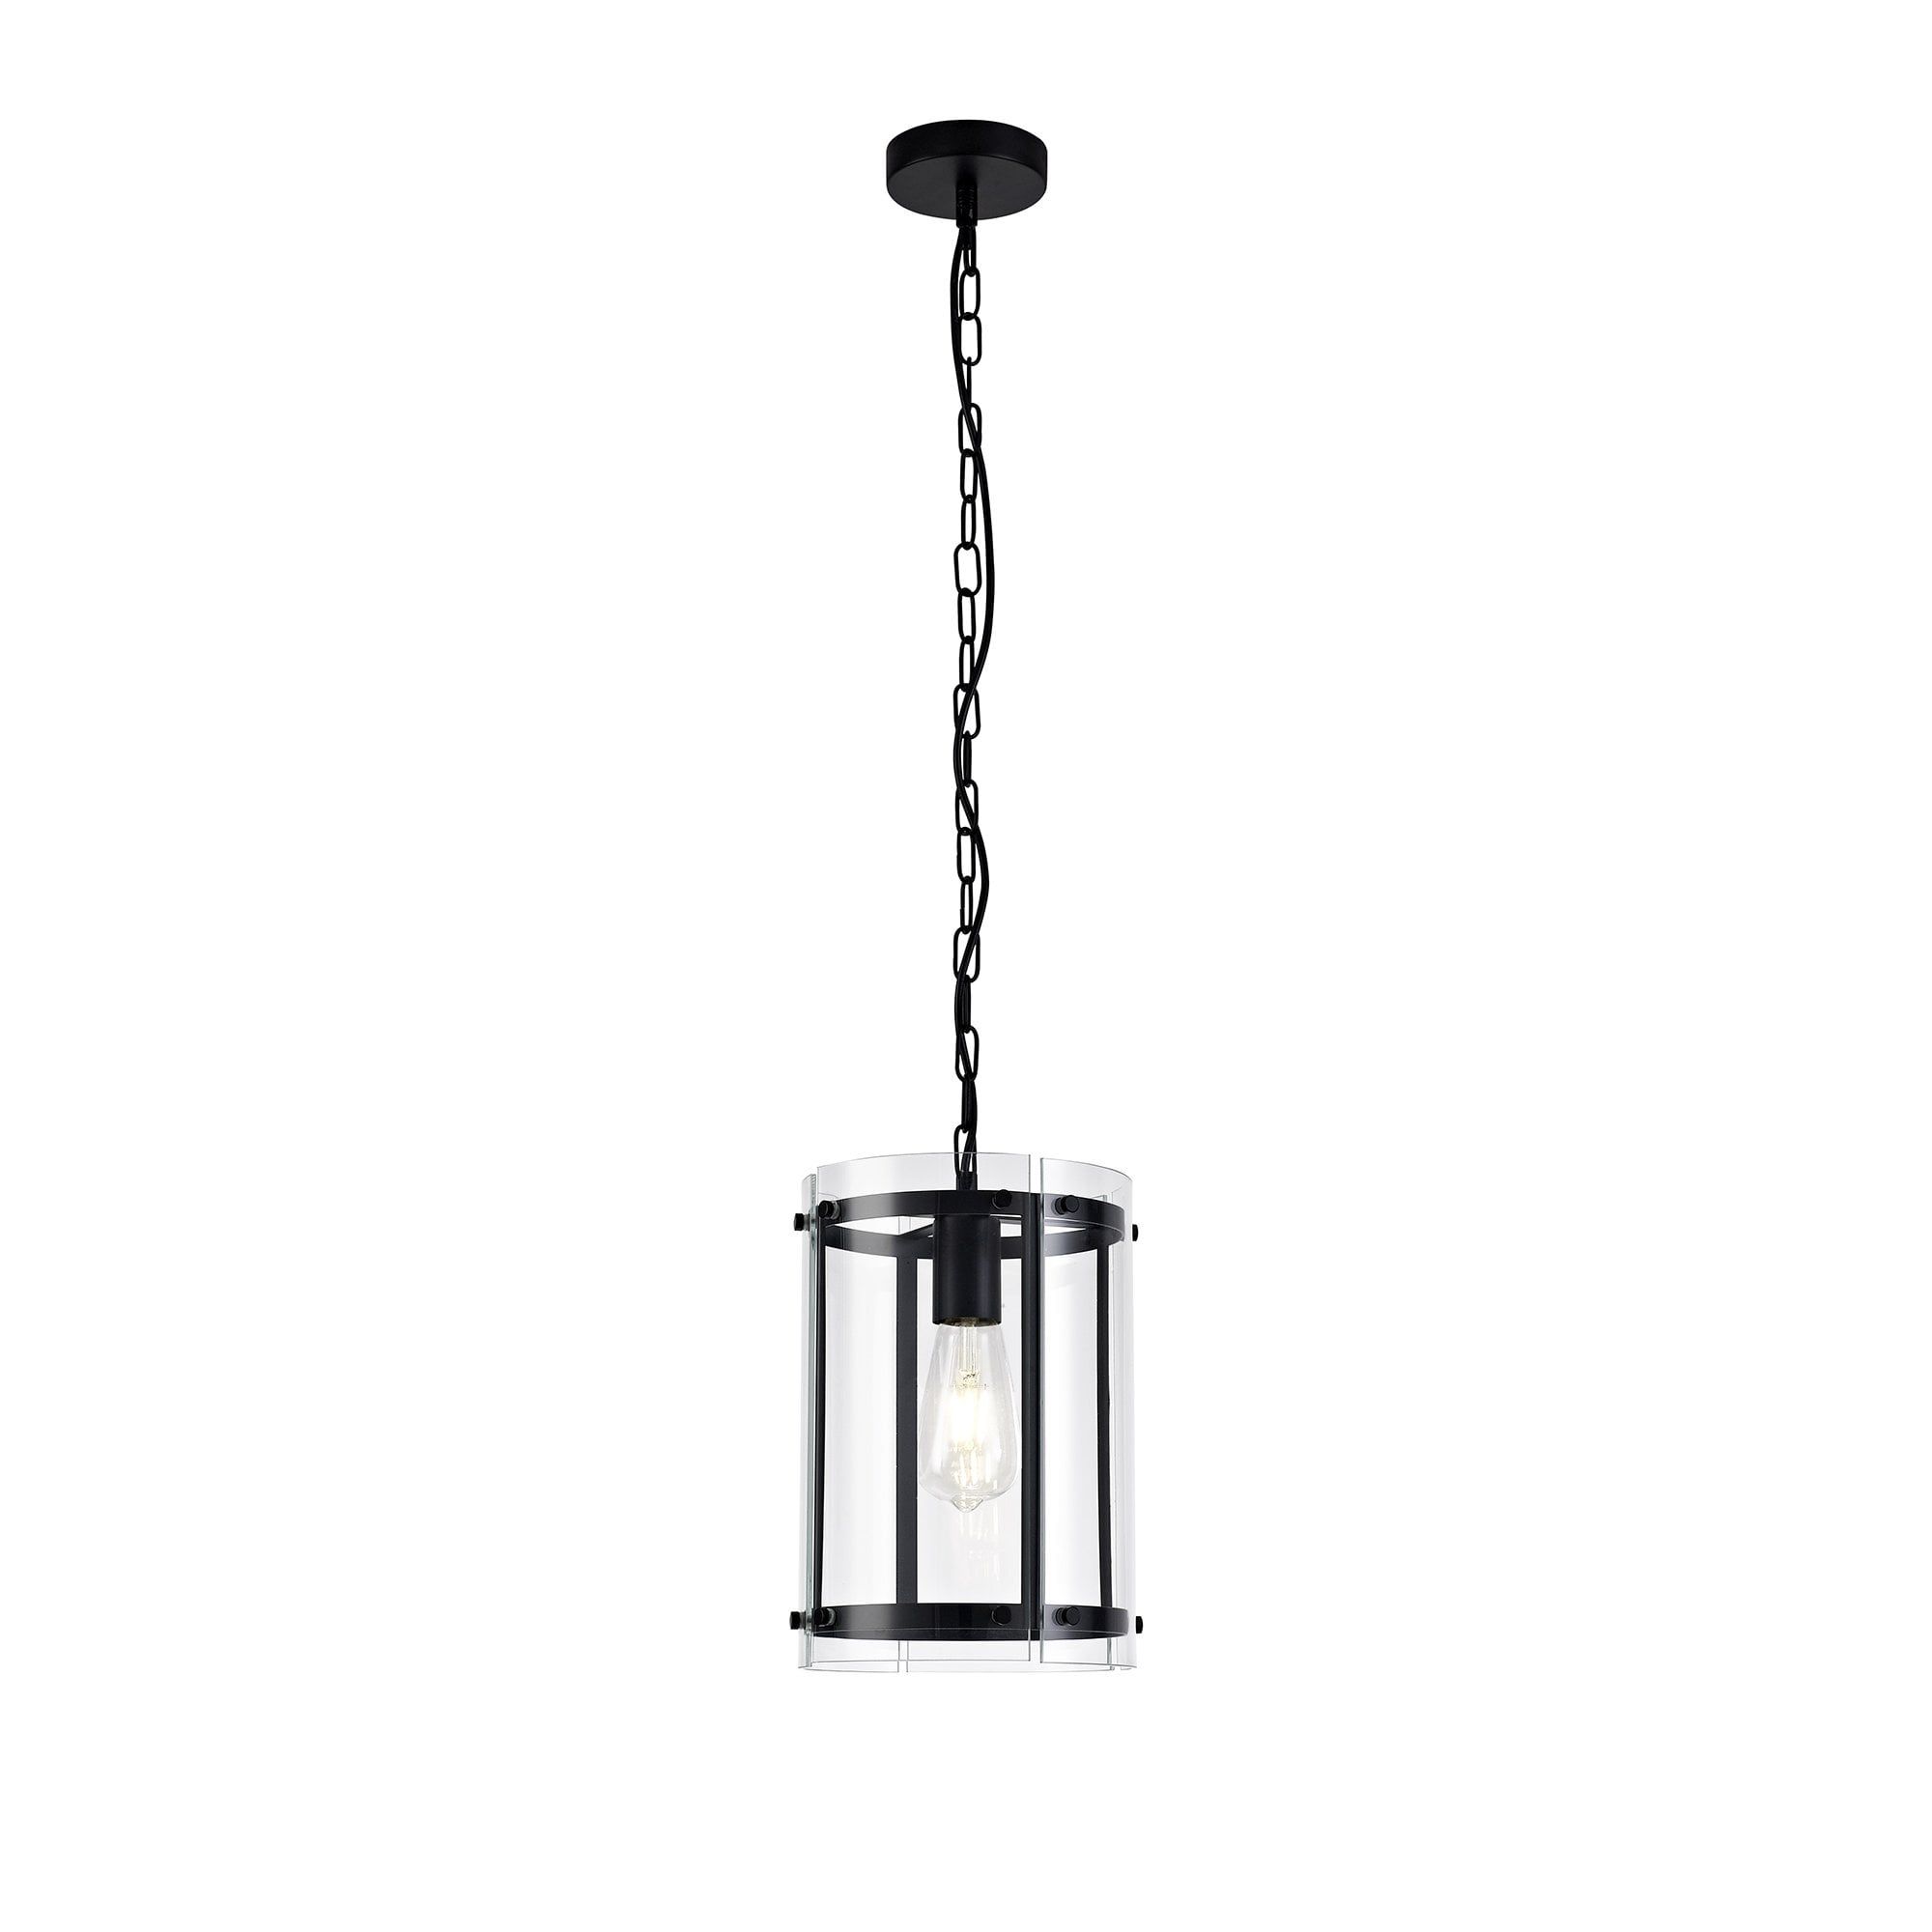 2020 Flat Black Lantern Chandeliers Throughout Ceiling Pendant Lantern In Matte Black With Glass Panels (View 12 of 15)